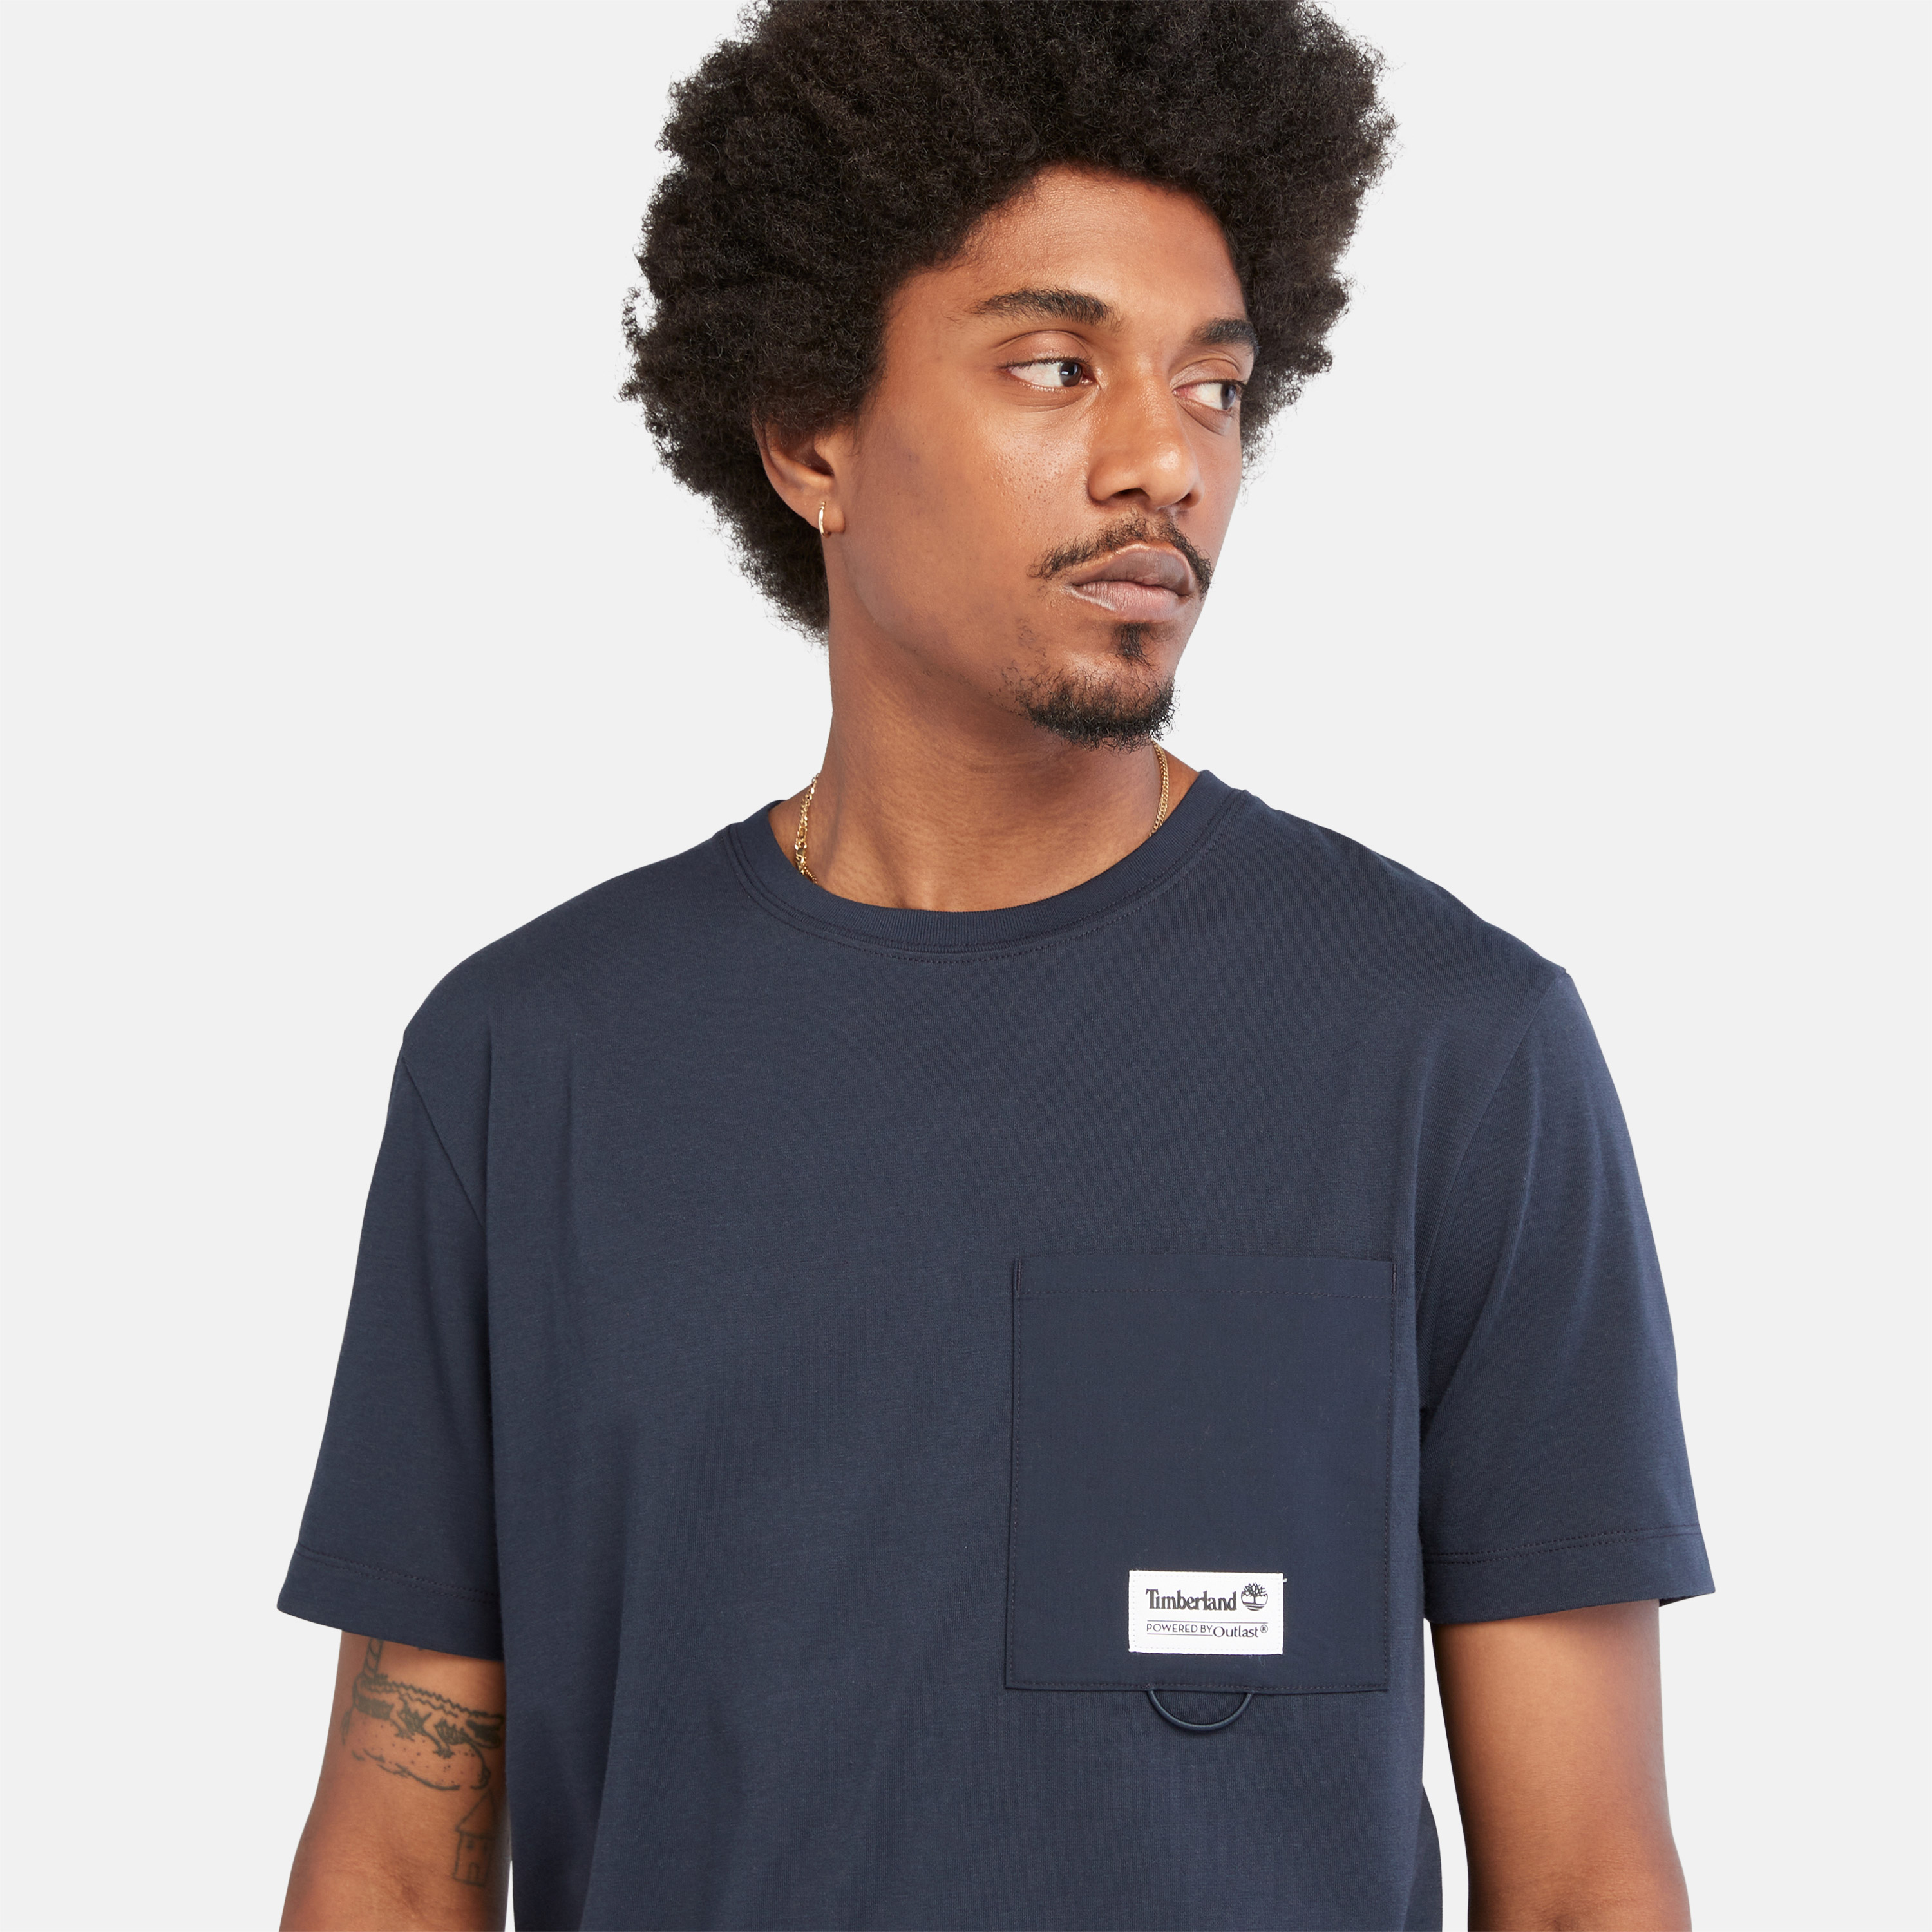 Timberland Men's SS Pocket Tee With Outlast® Technology - Timberland ...